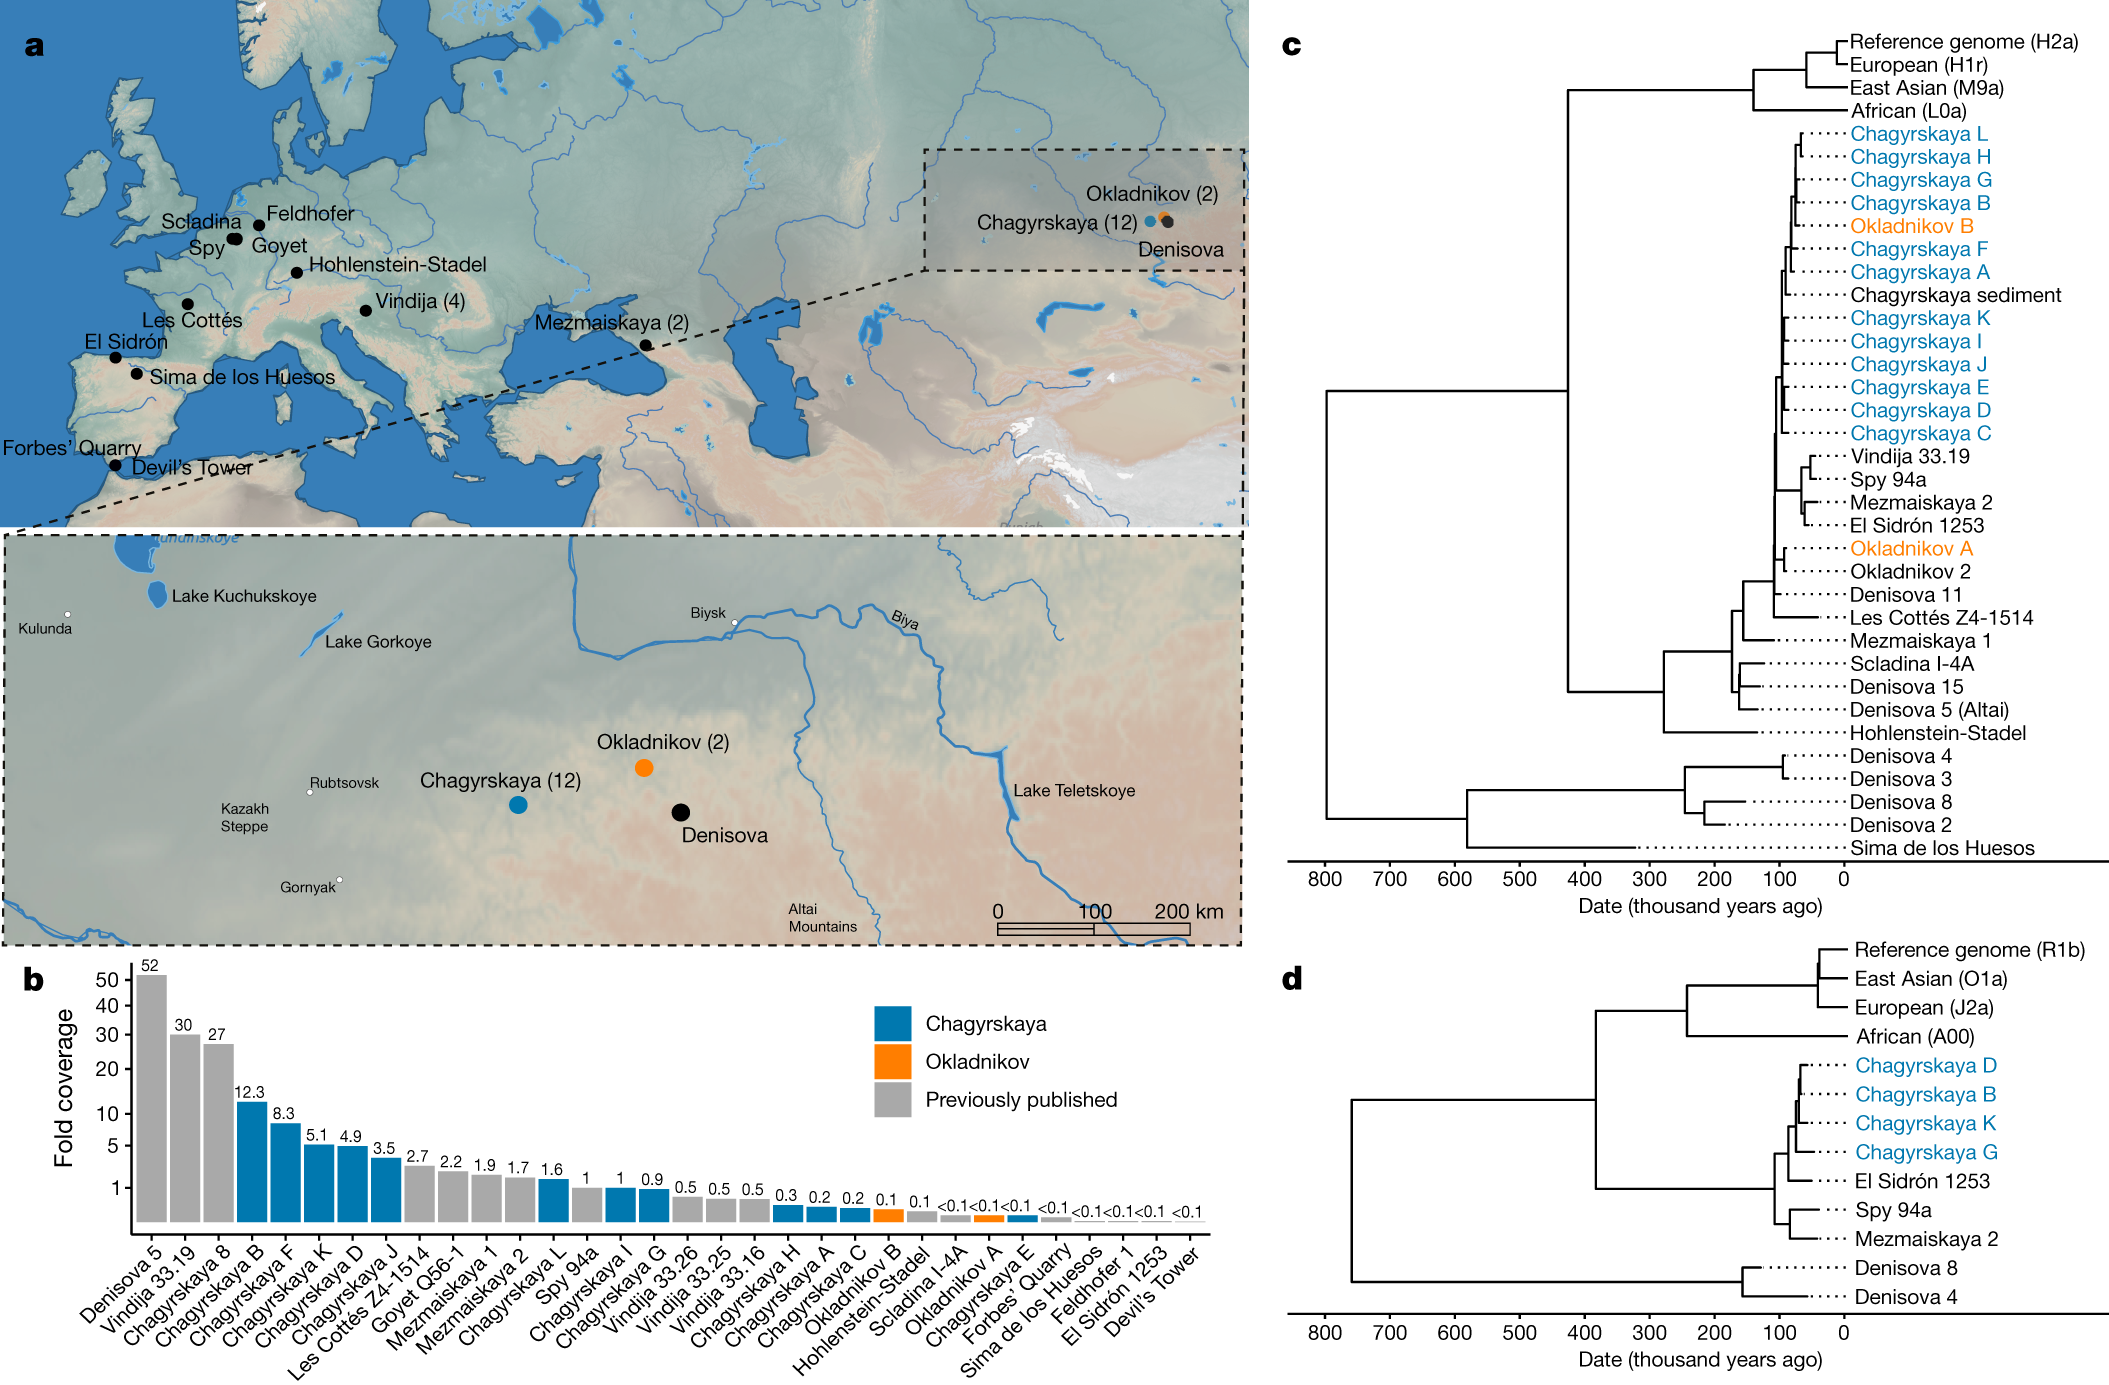 Genetic insights into the social organization of Neanderthals Nature